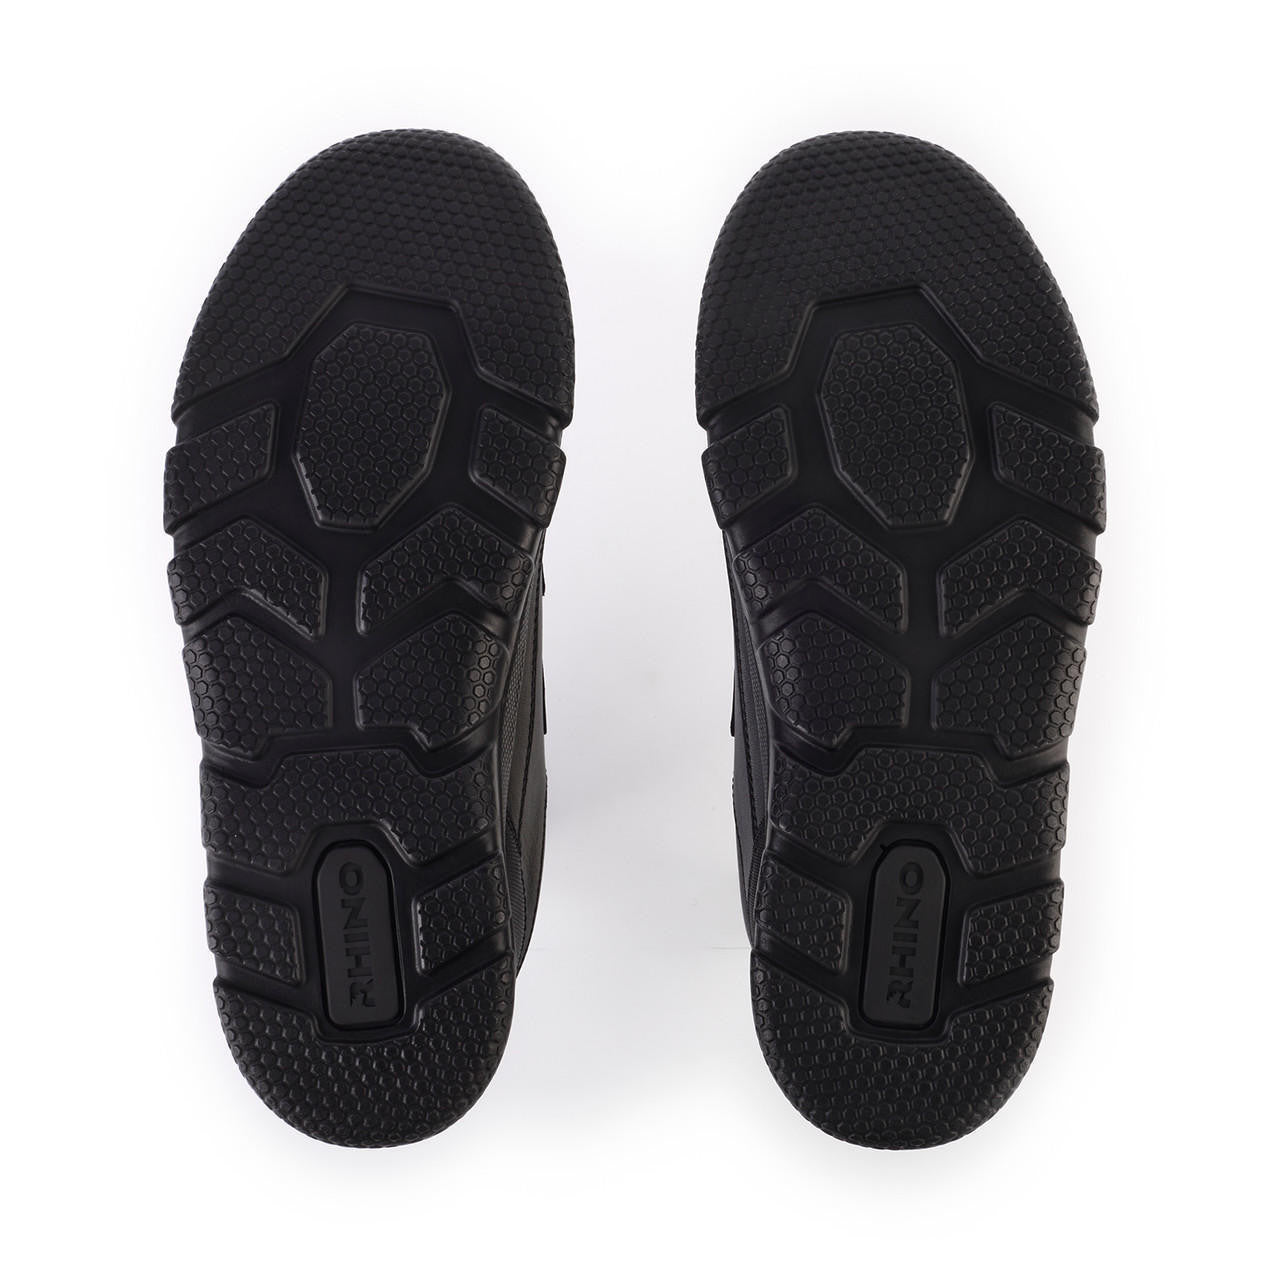 A pair of boys waterproof school shoes by Start Rite, style Trooper, in black leather with double velcro fastening. View of sole.